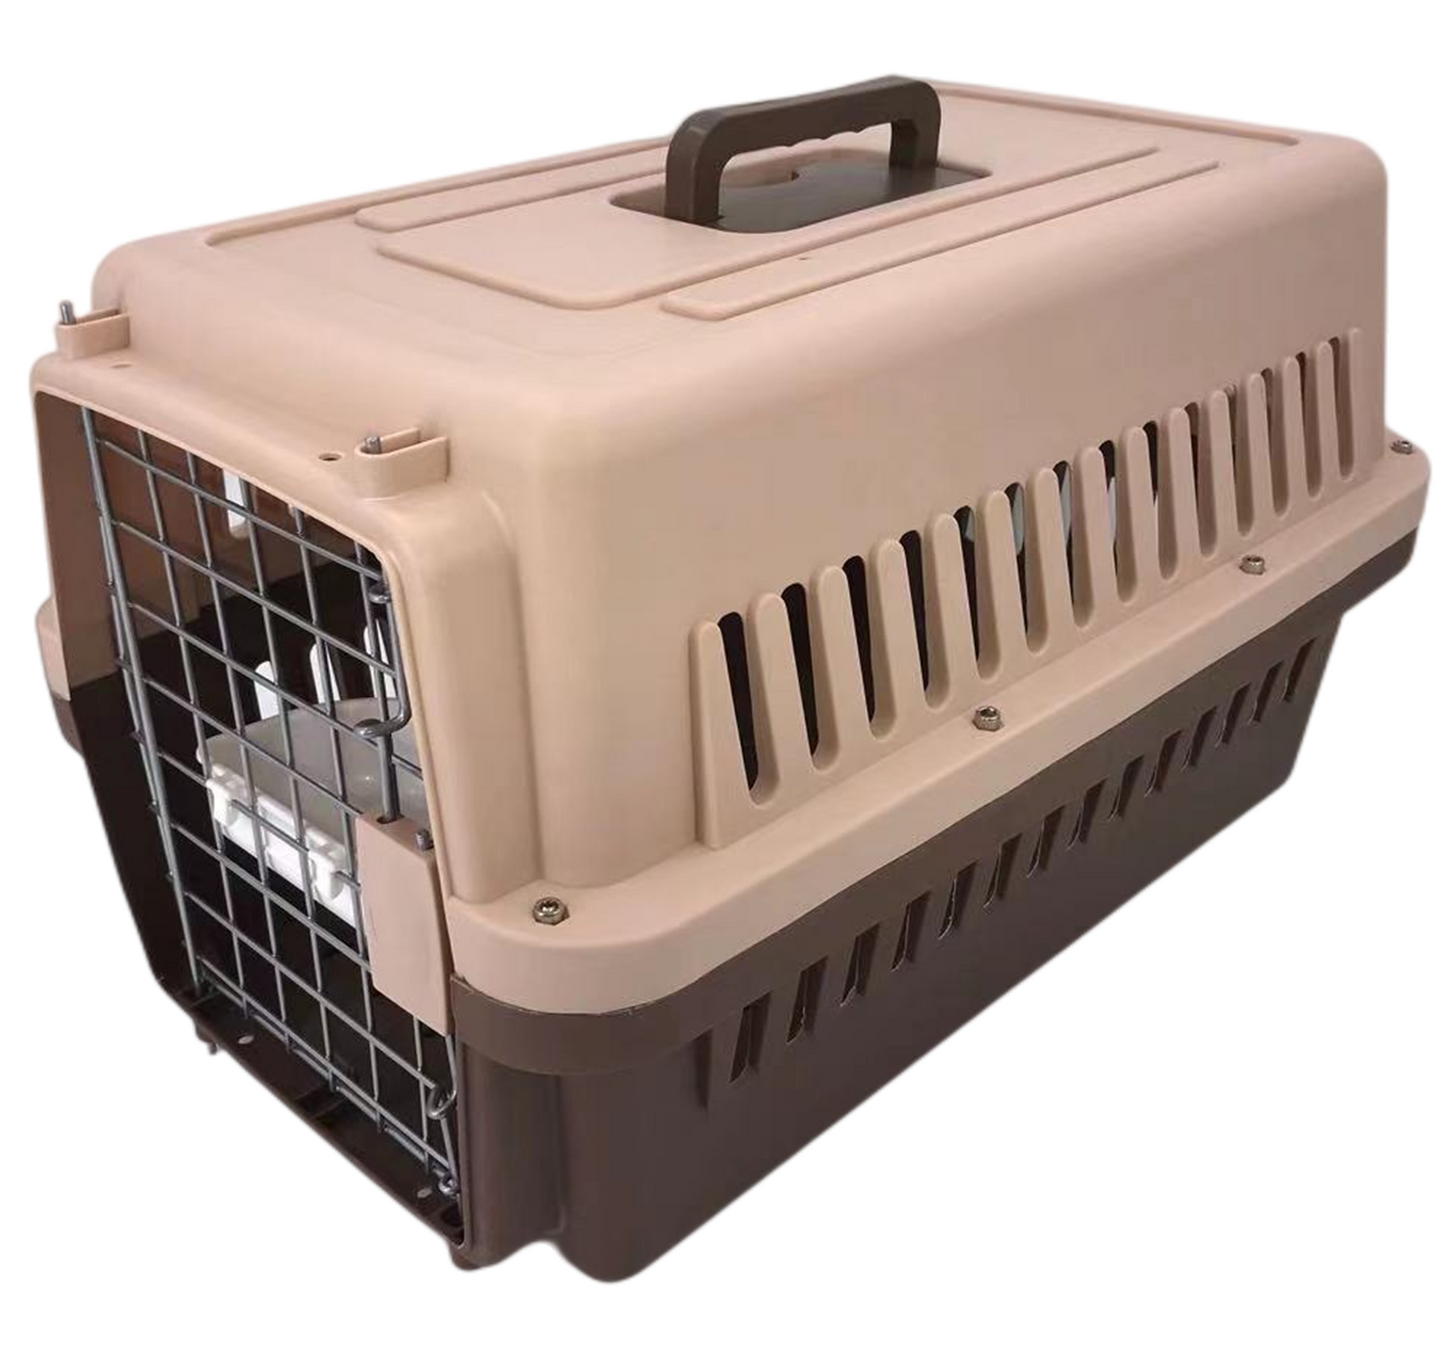 YES4PETS New Medium Dog Cat Rabbit Crate Pet Carrier Cage With Bowl & Tray Brown